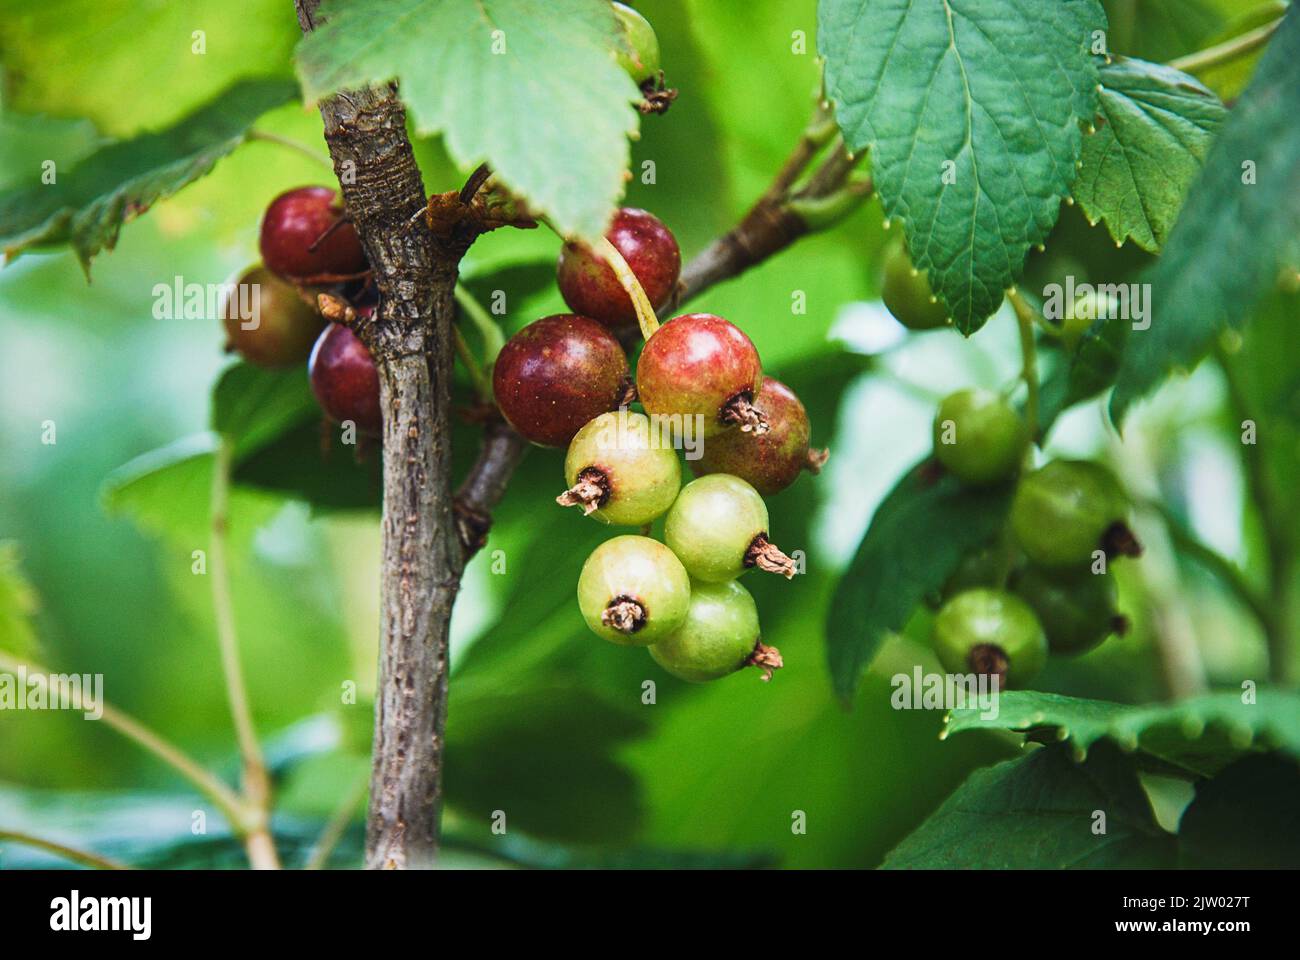 Black currant fruit ripening on branch in the garden Stock Photo